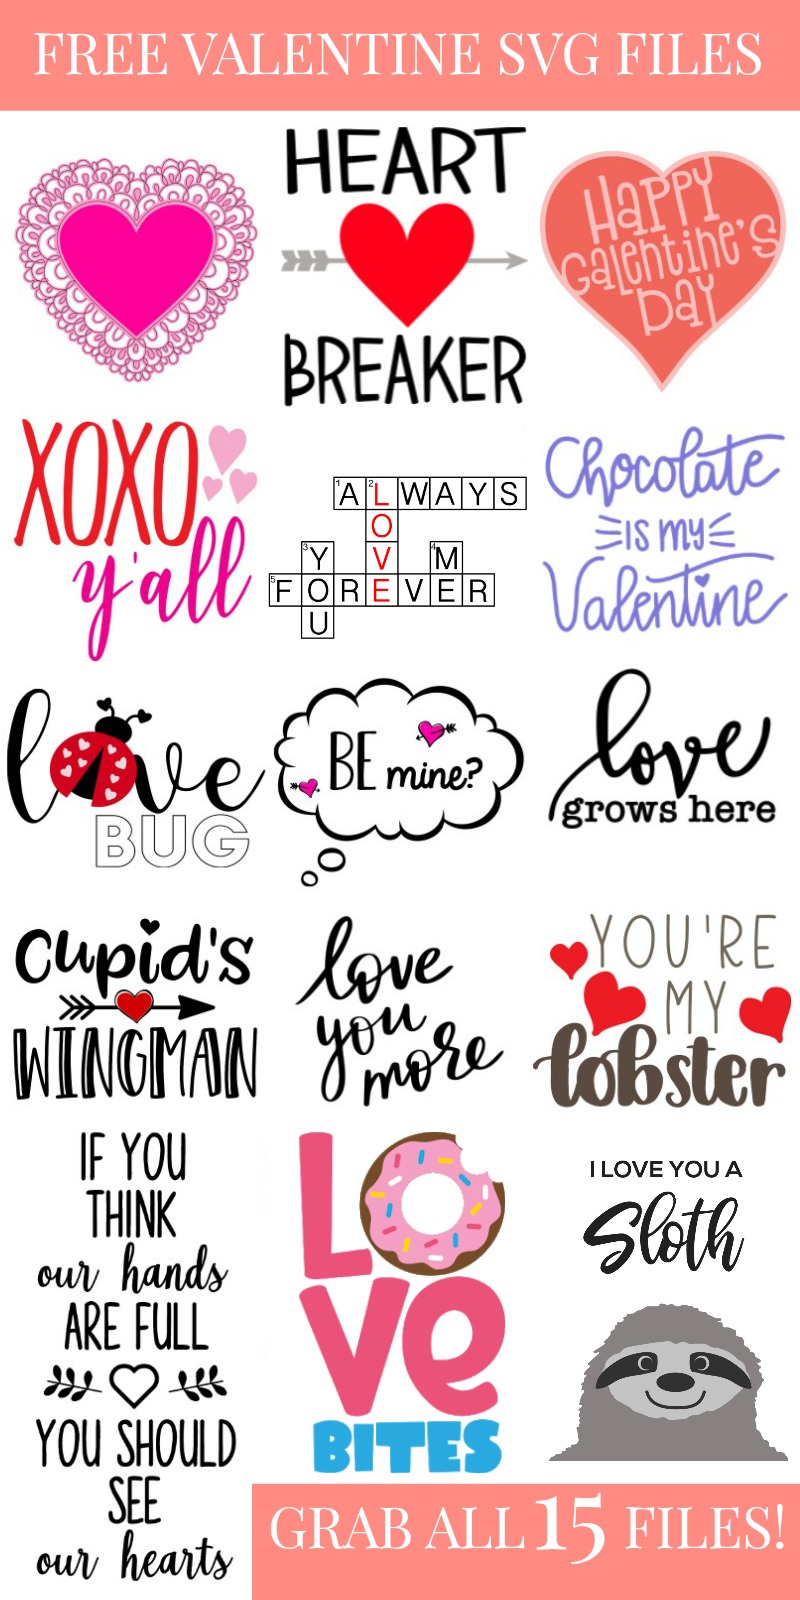 Pull out your Cricut or SIlhouette and start whipping up Valentine's Day handmade gifts and crafts! We are sharing 15 free Valentine's Day SVG Files including our own "Be Mine" cut file! Make an easy handmade gift or decorate for the holiday of love with a fun cutting machine project! #Valentine #ValentinesDay #Cricut #Silhouette #CricutProject #FreeSVG